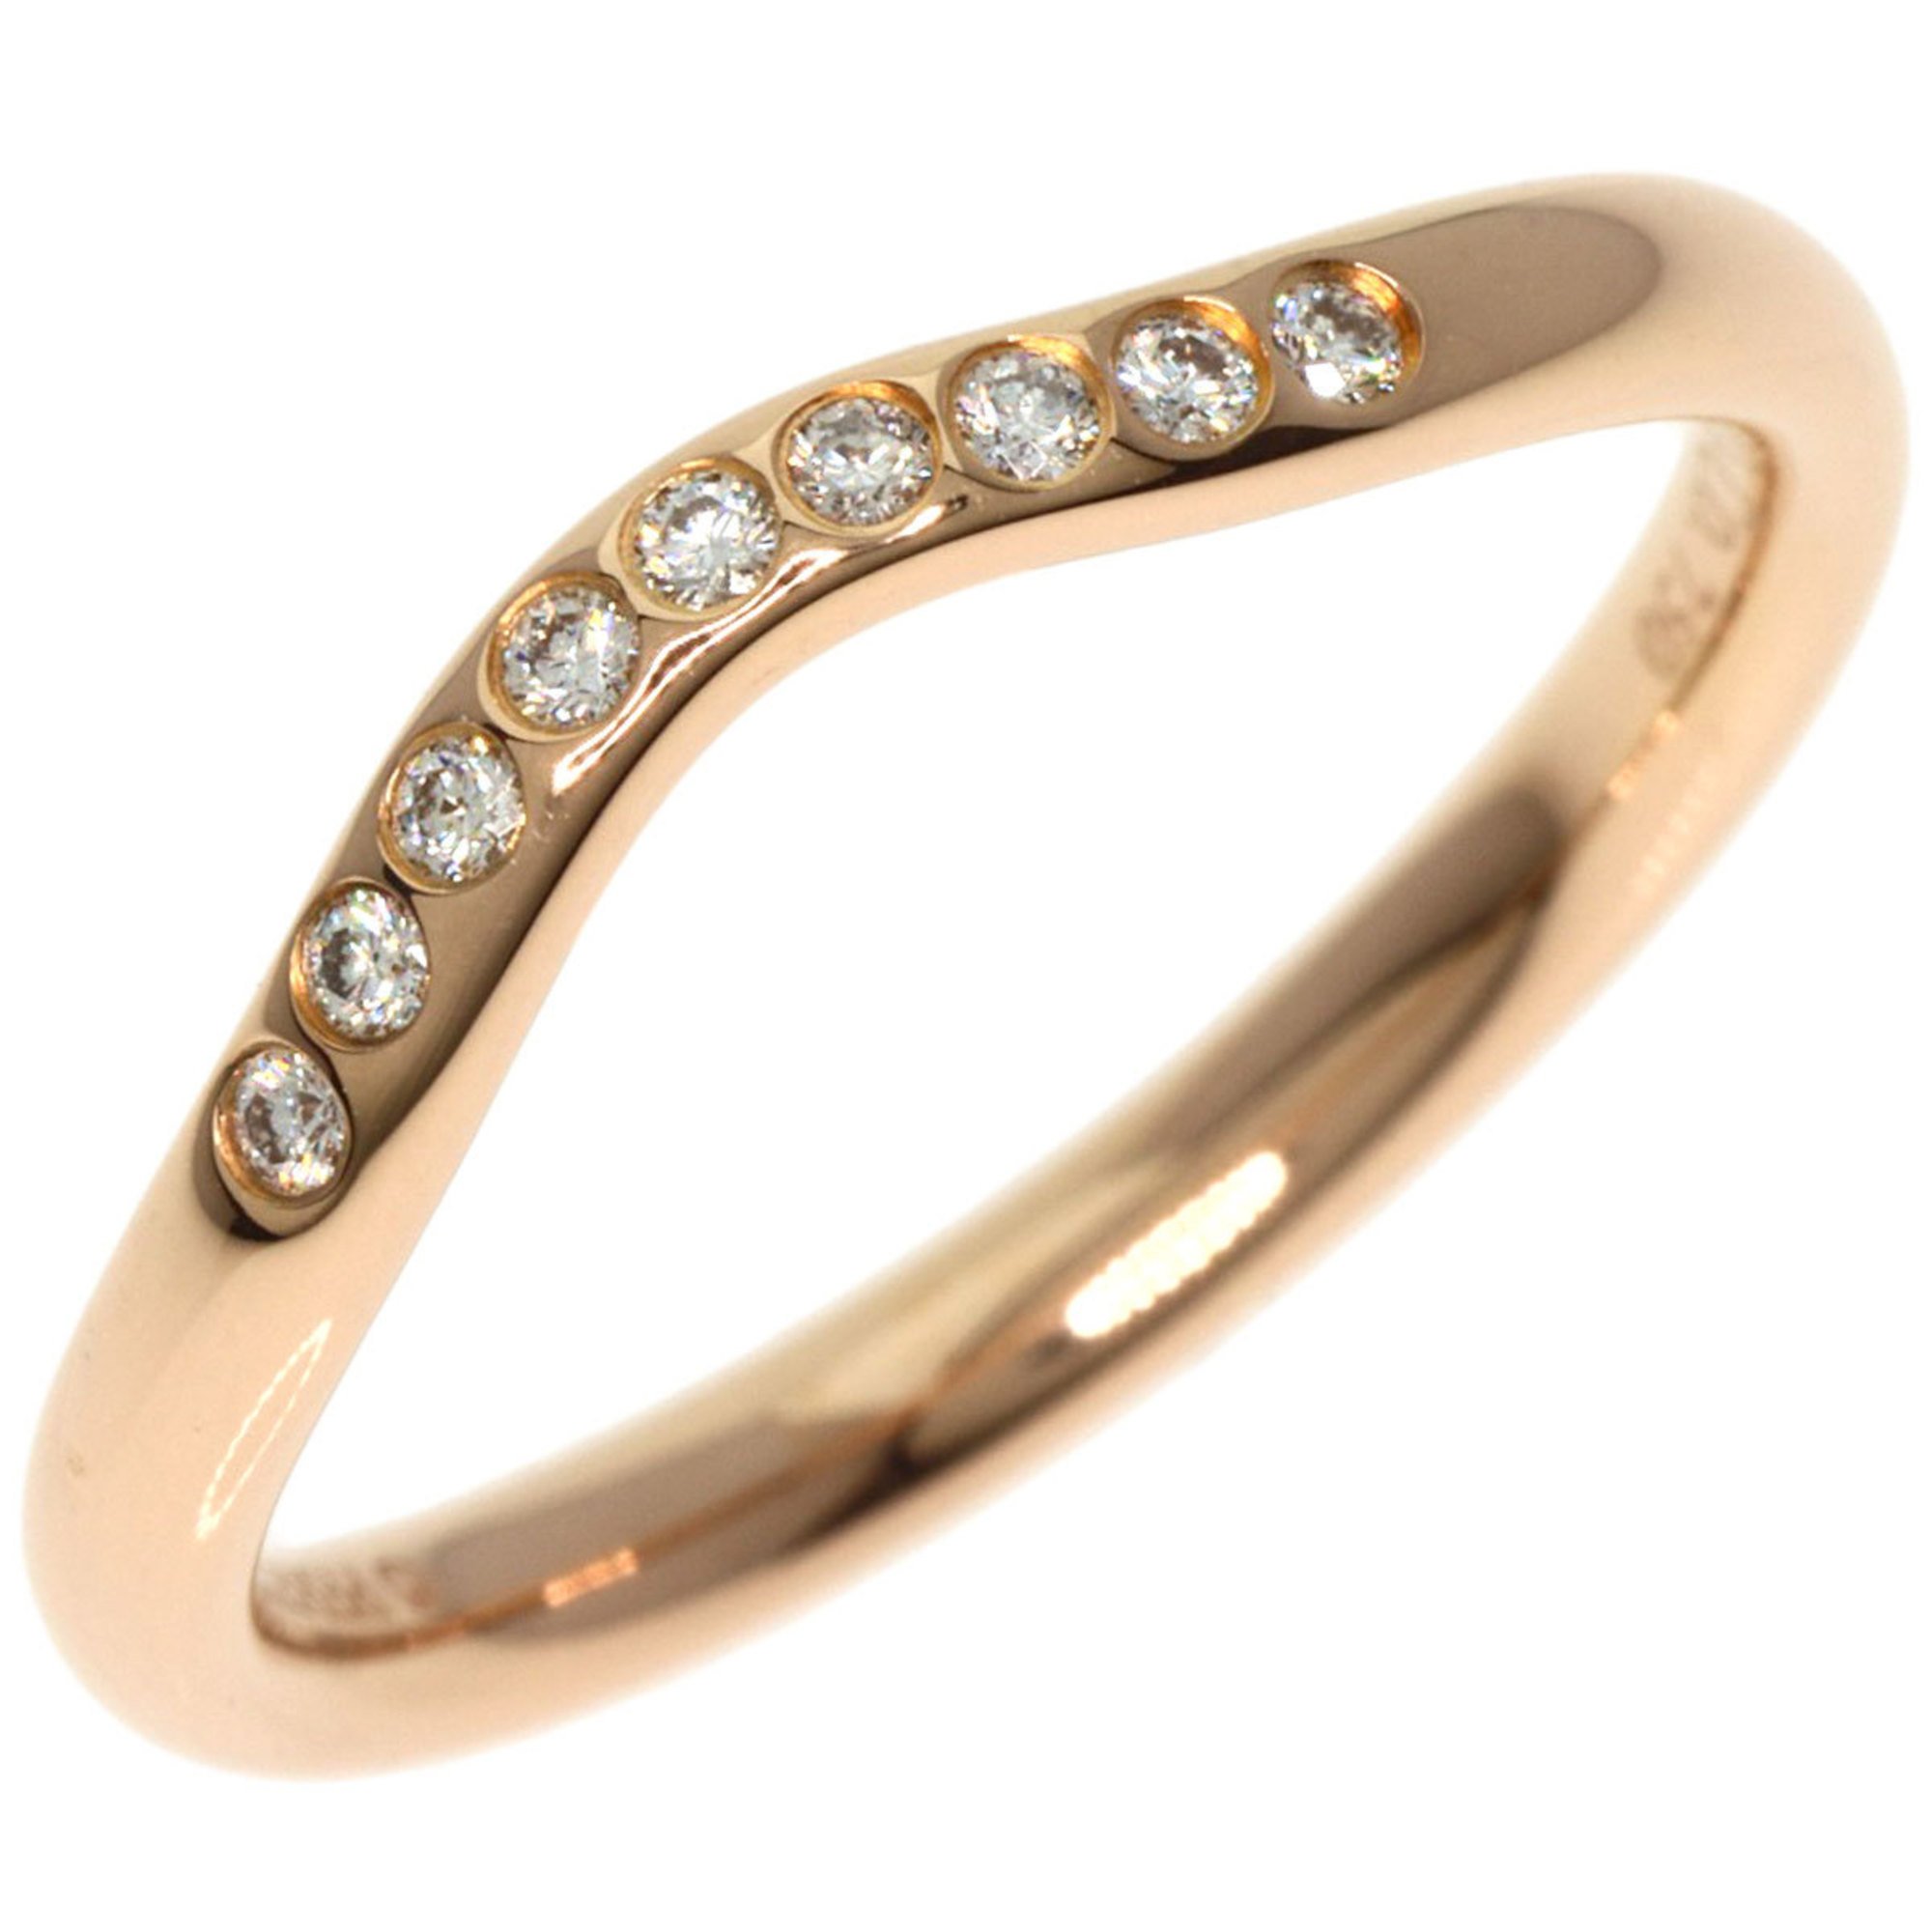 Tiffany curved band diamond ring, 18K pink gold, ladies